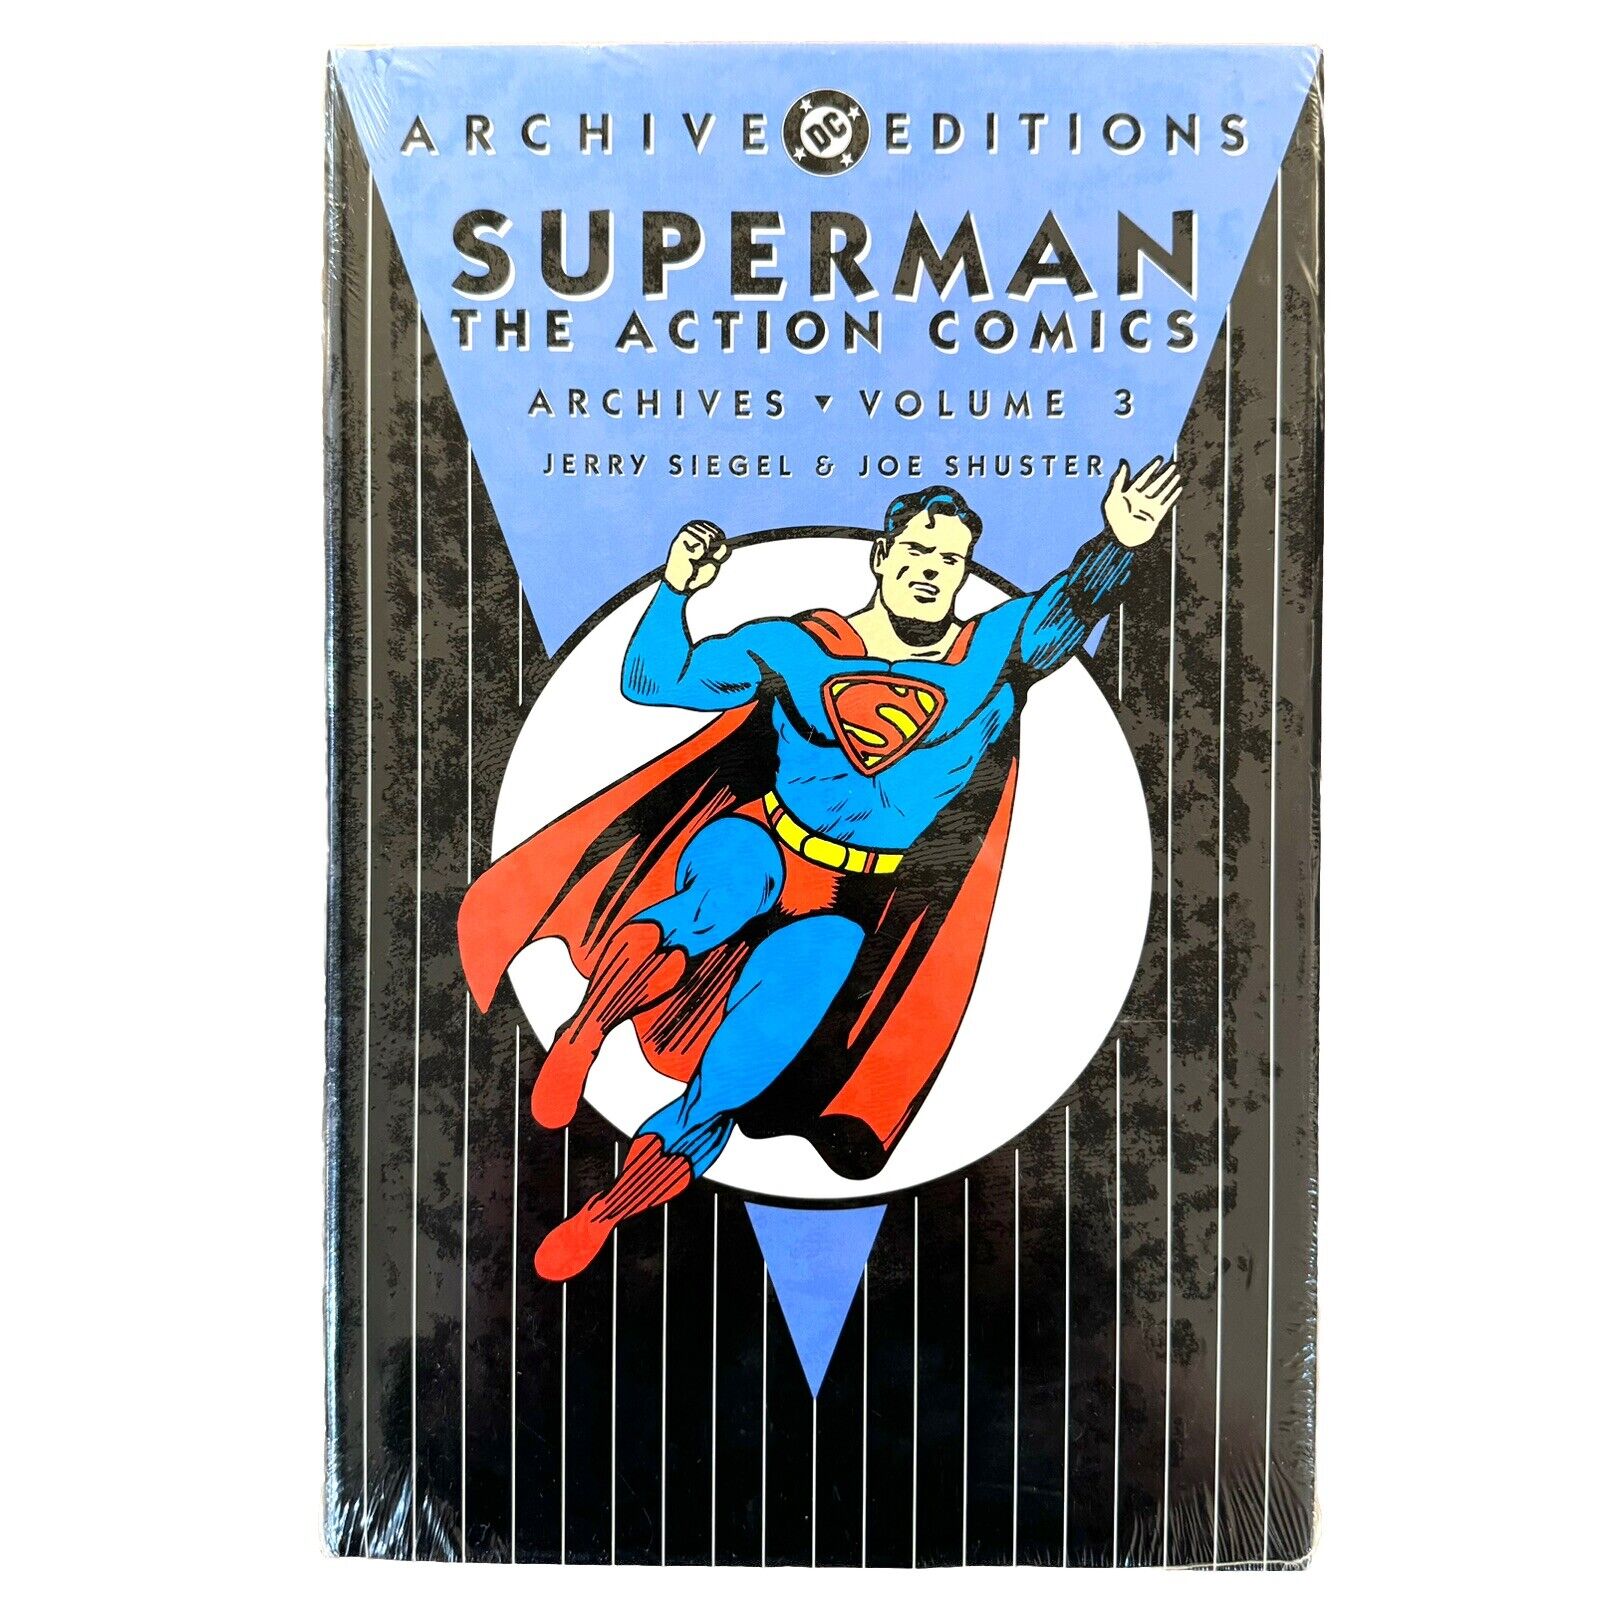 Superman Action Comics Archives Vol 3 New Sealed Hardcover We Combine Shipping